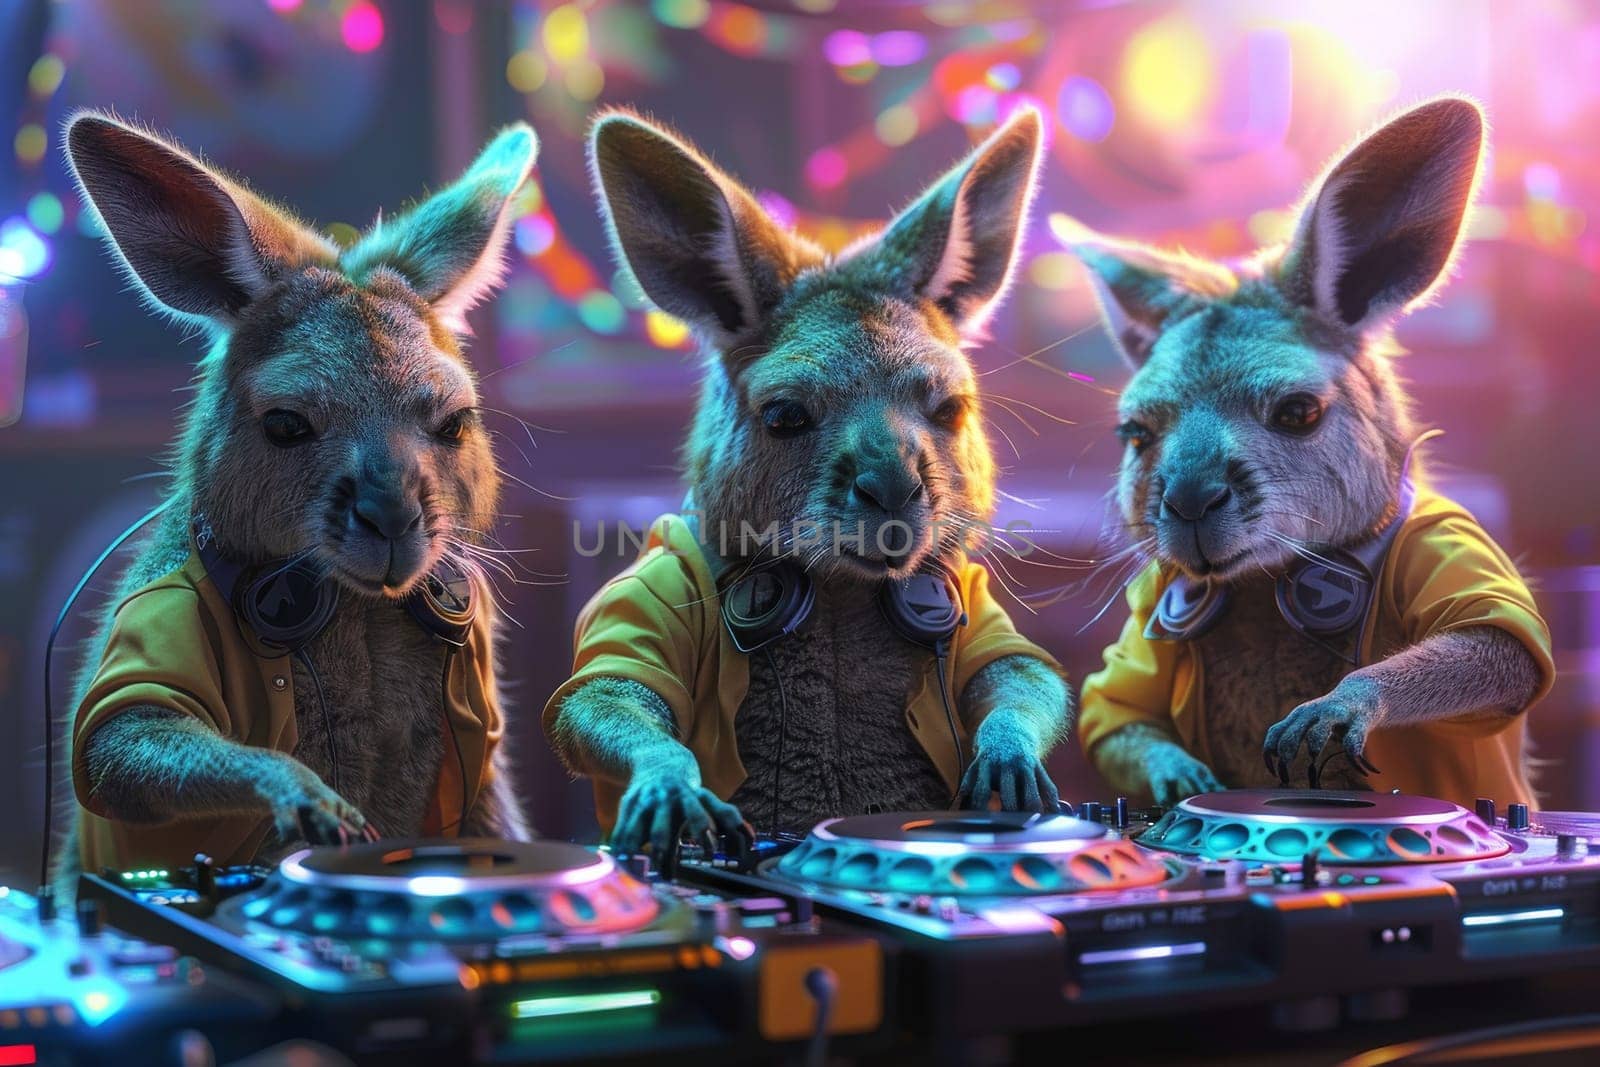 A kangaroo is playing a DJ set. The kangaroo is wearing a red and yellow shirt and is standing in front of a DJ set